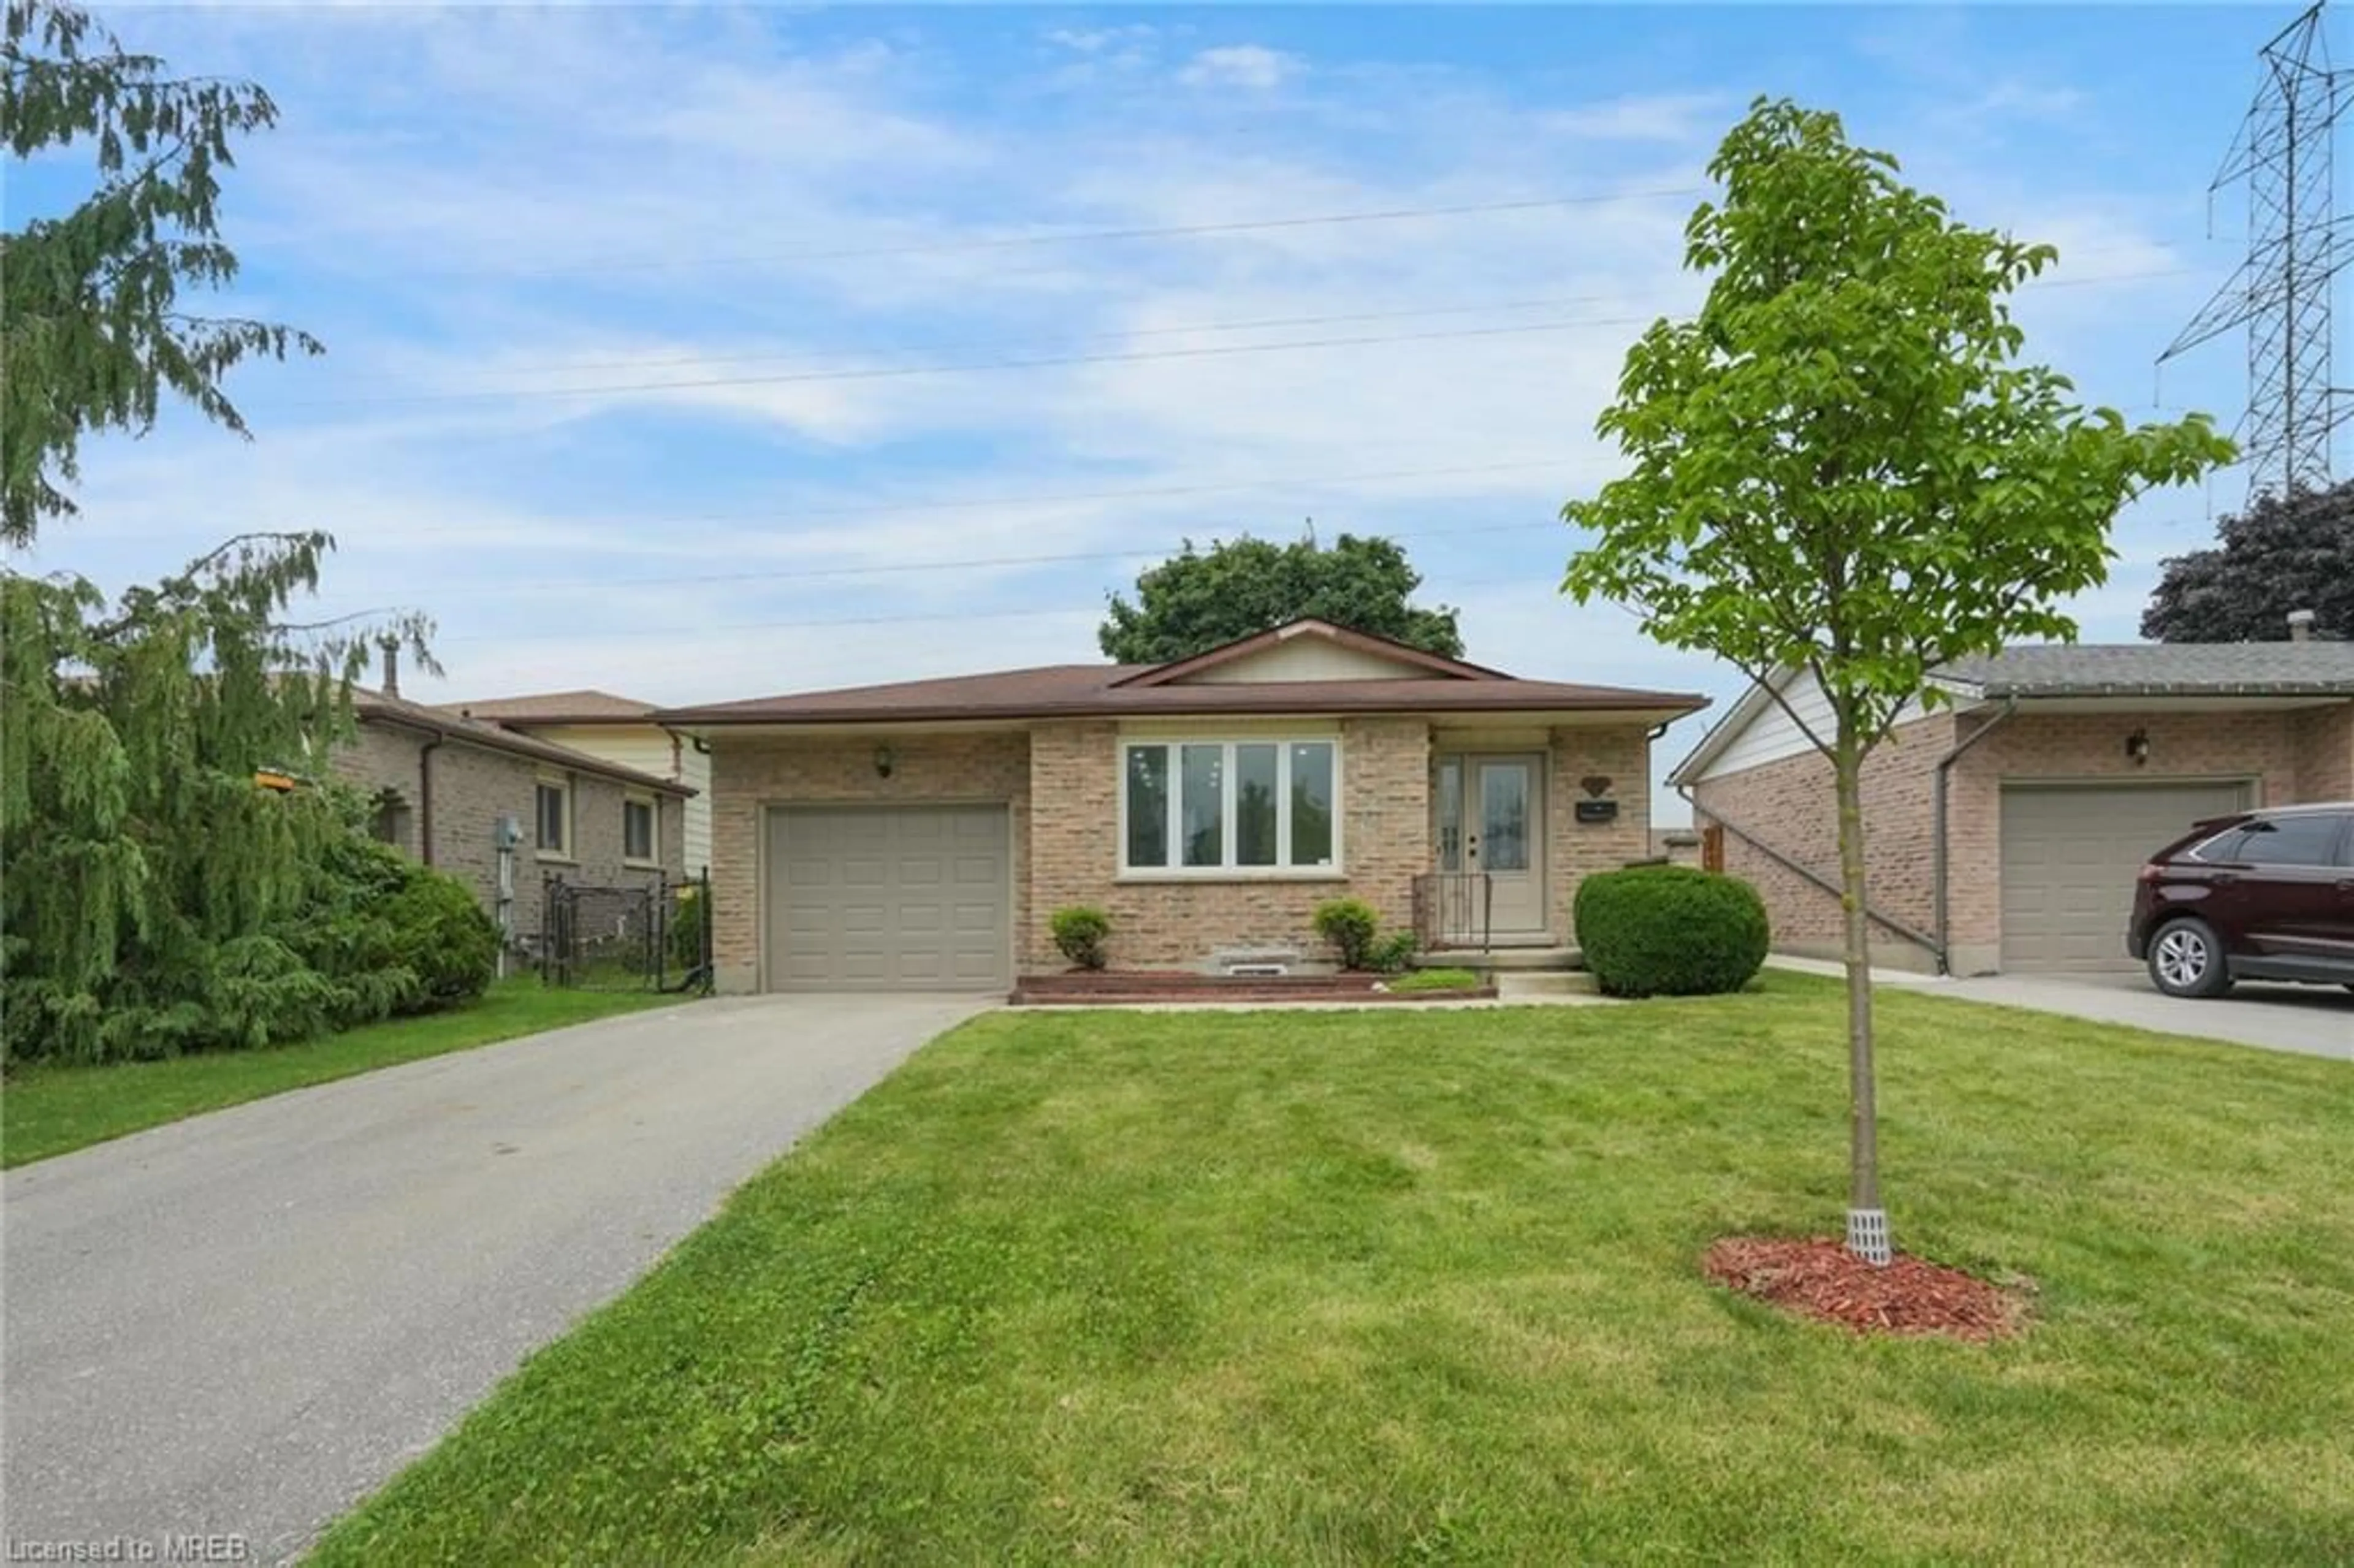 Frontside or backside of a home for 72 Lysanda Ave, London Ontario N5Z 4L4